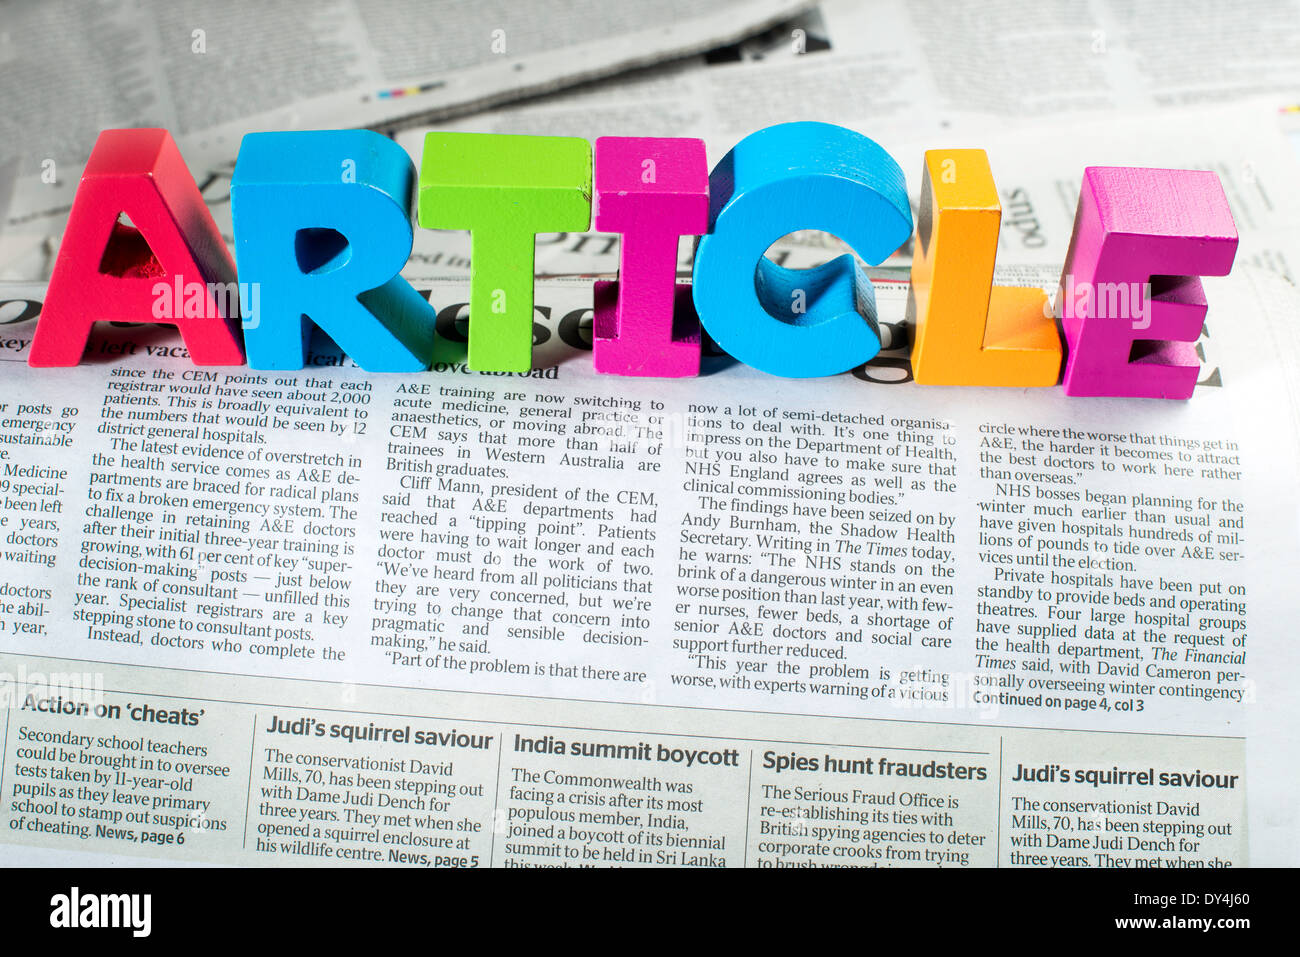 Word article on newspaper. Wooden letters Stock Photo